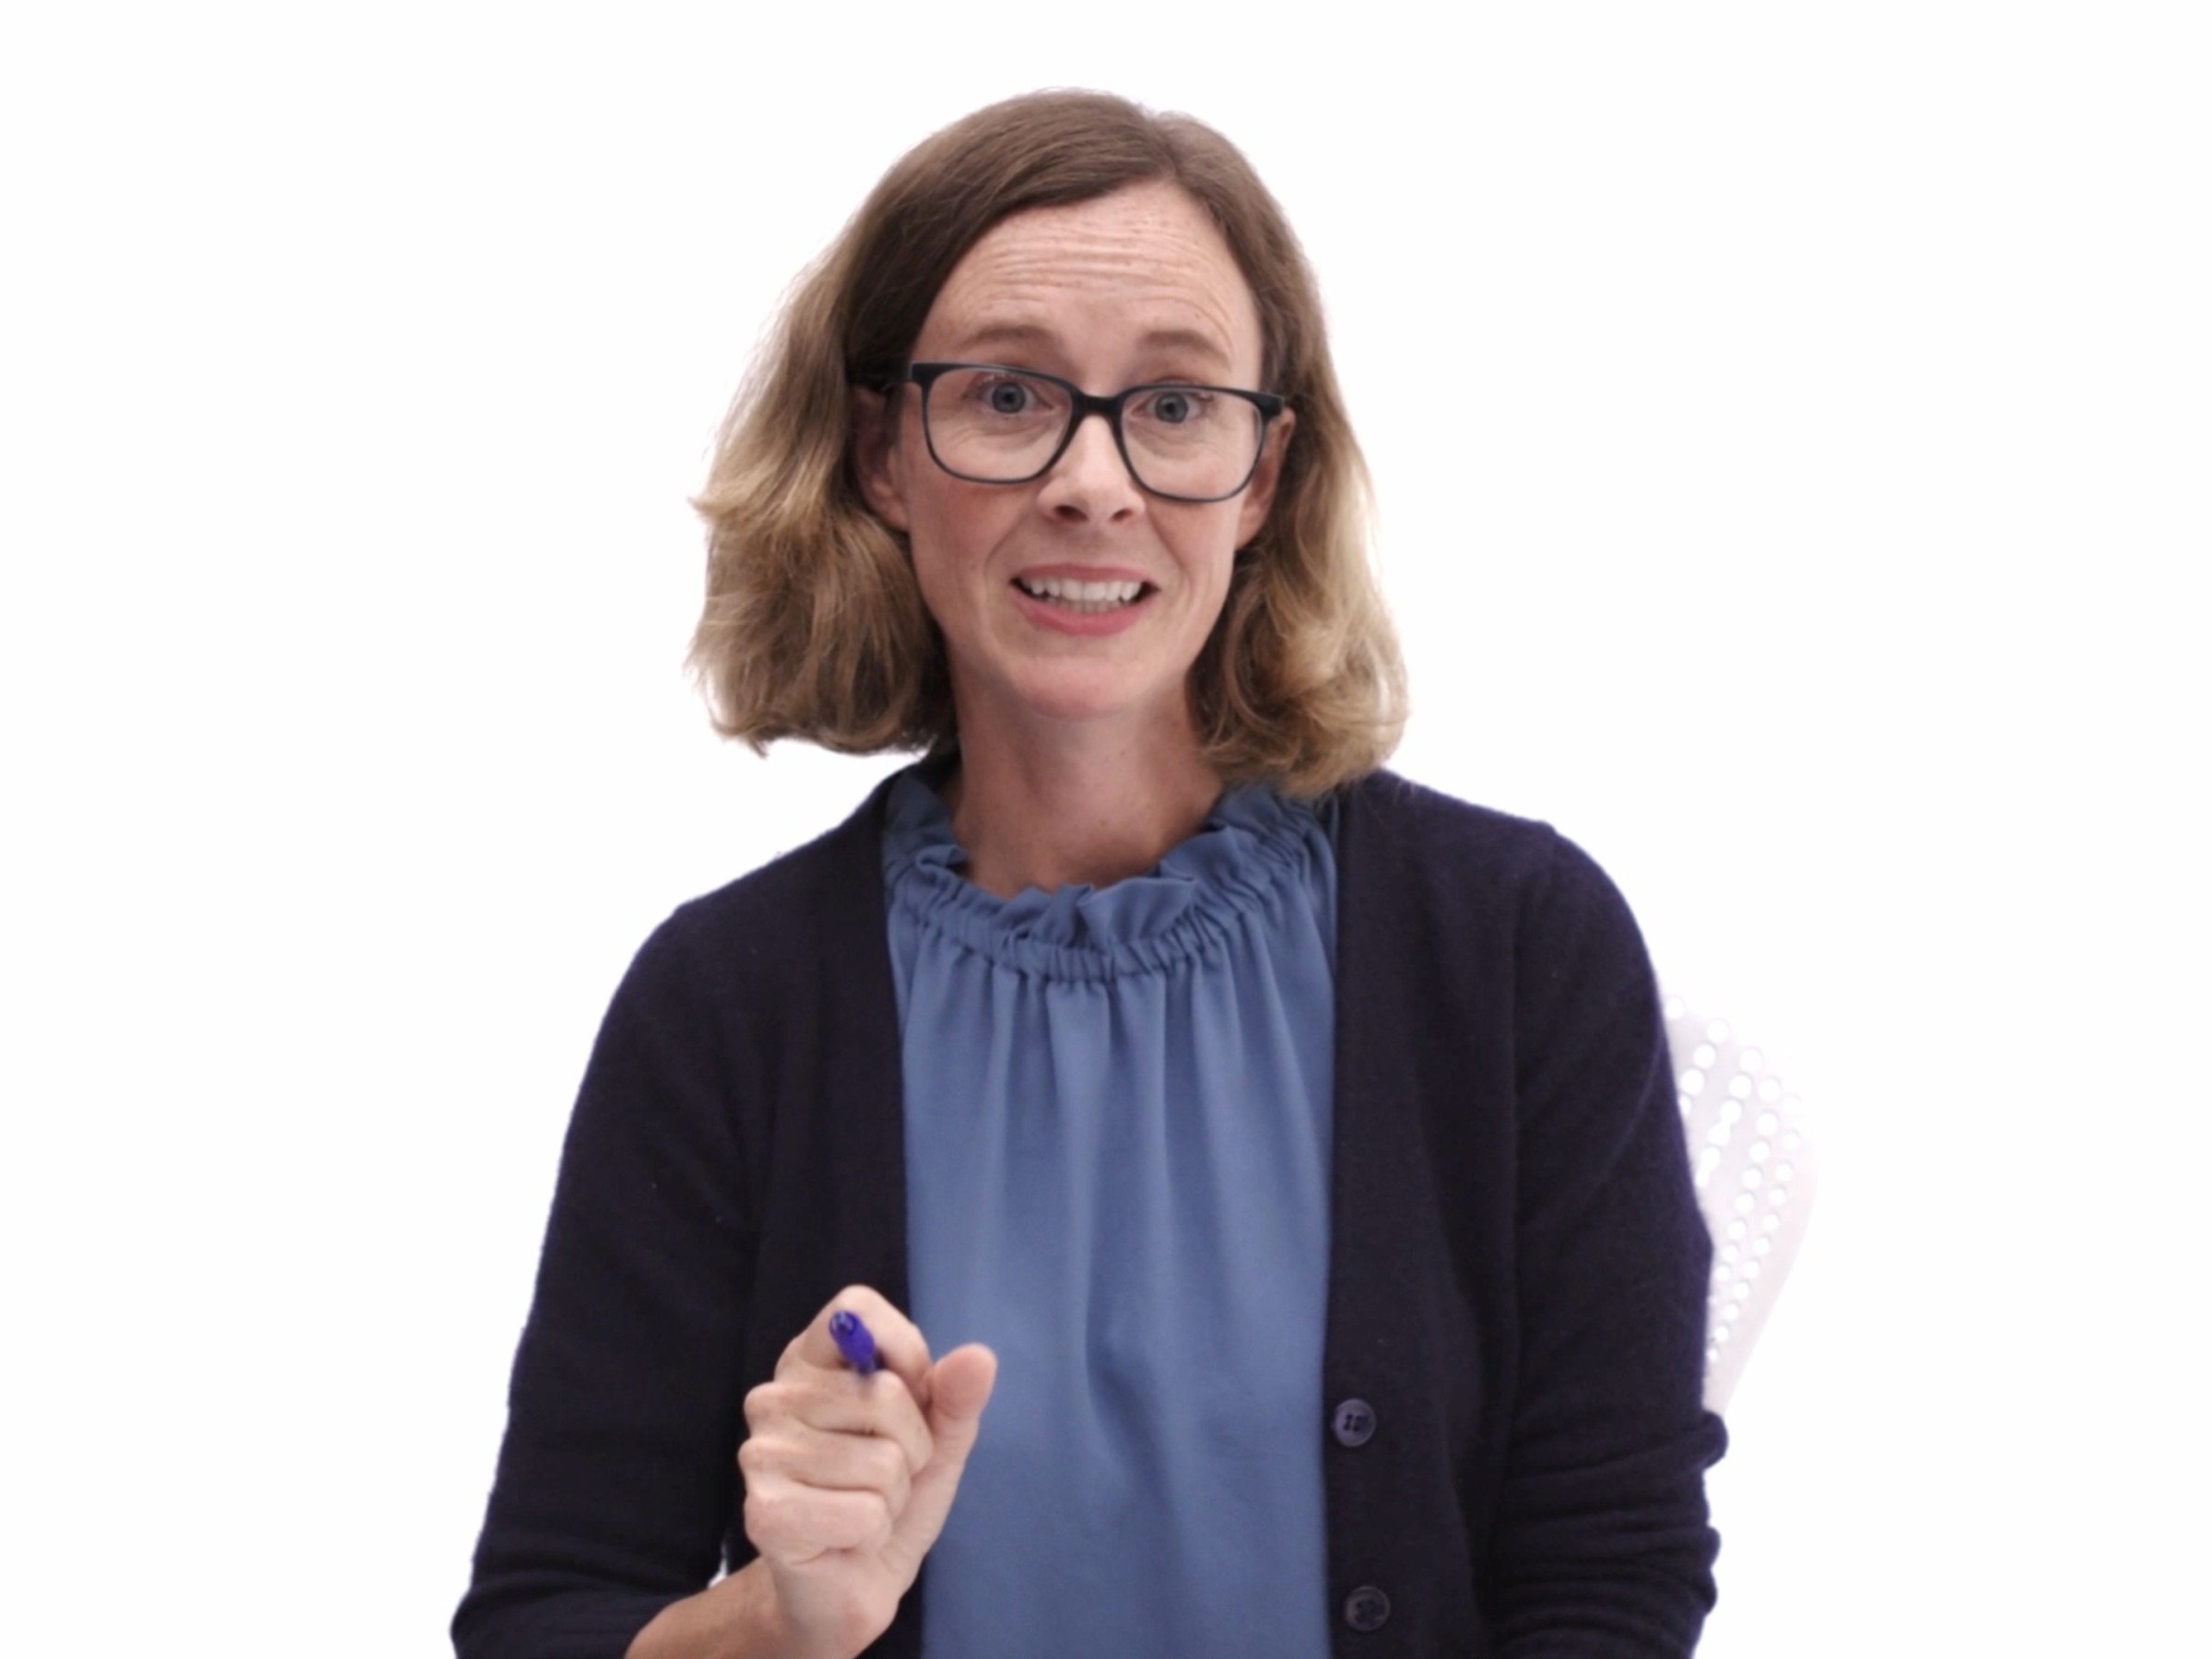 A white woman with medium-length red-blonde hair and large blue glasses talks in front of a white background gesturing with a pen as she wears a dark blue cardigan over a light blue blouse.